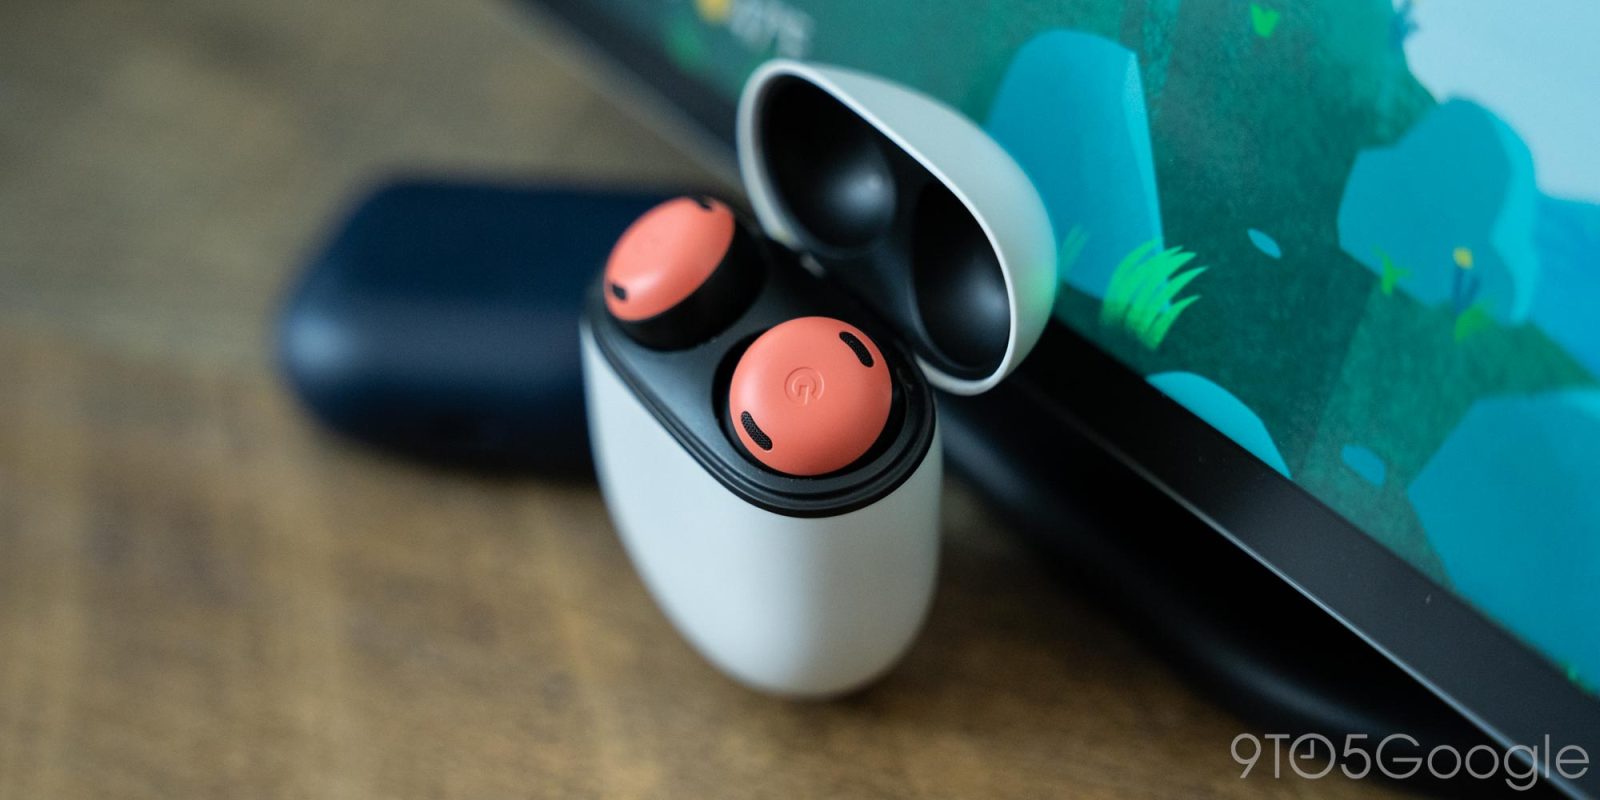 We Tested the Google Pixel Buds Pro and Here's Our Review